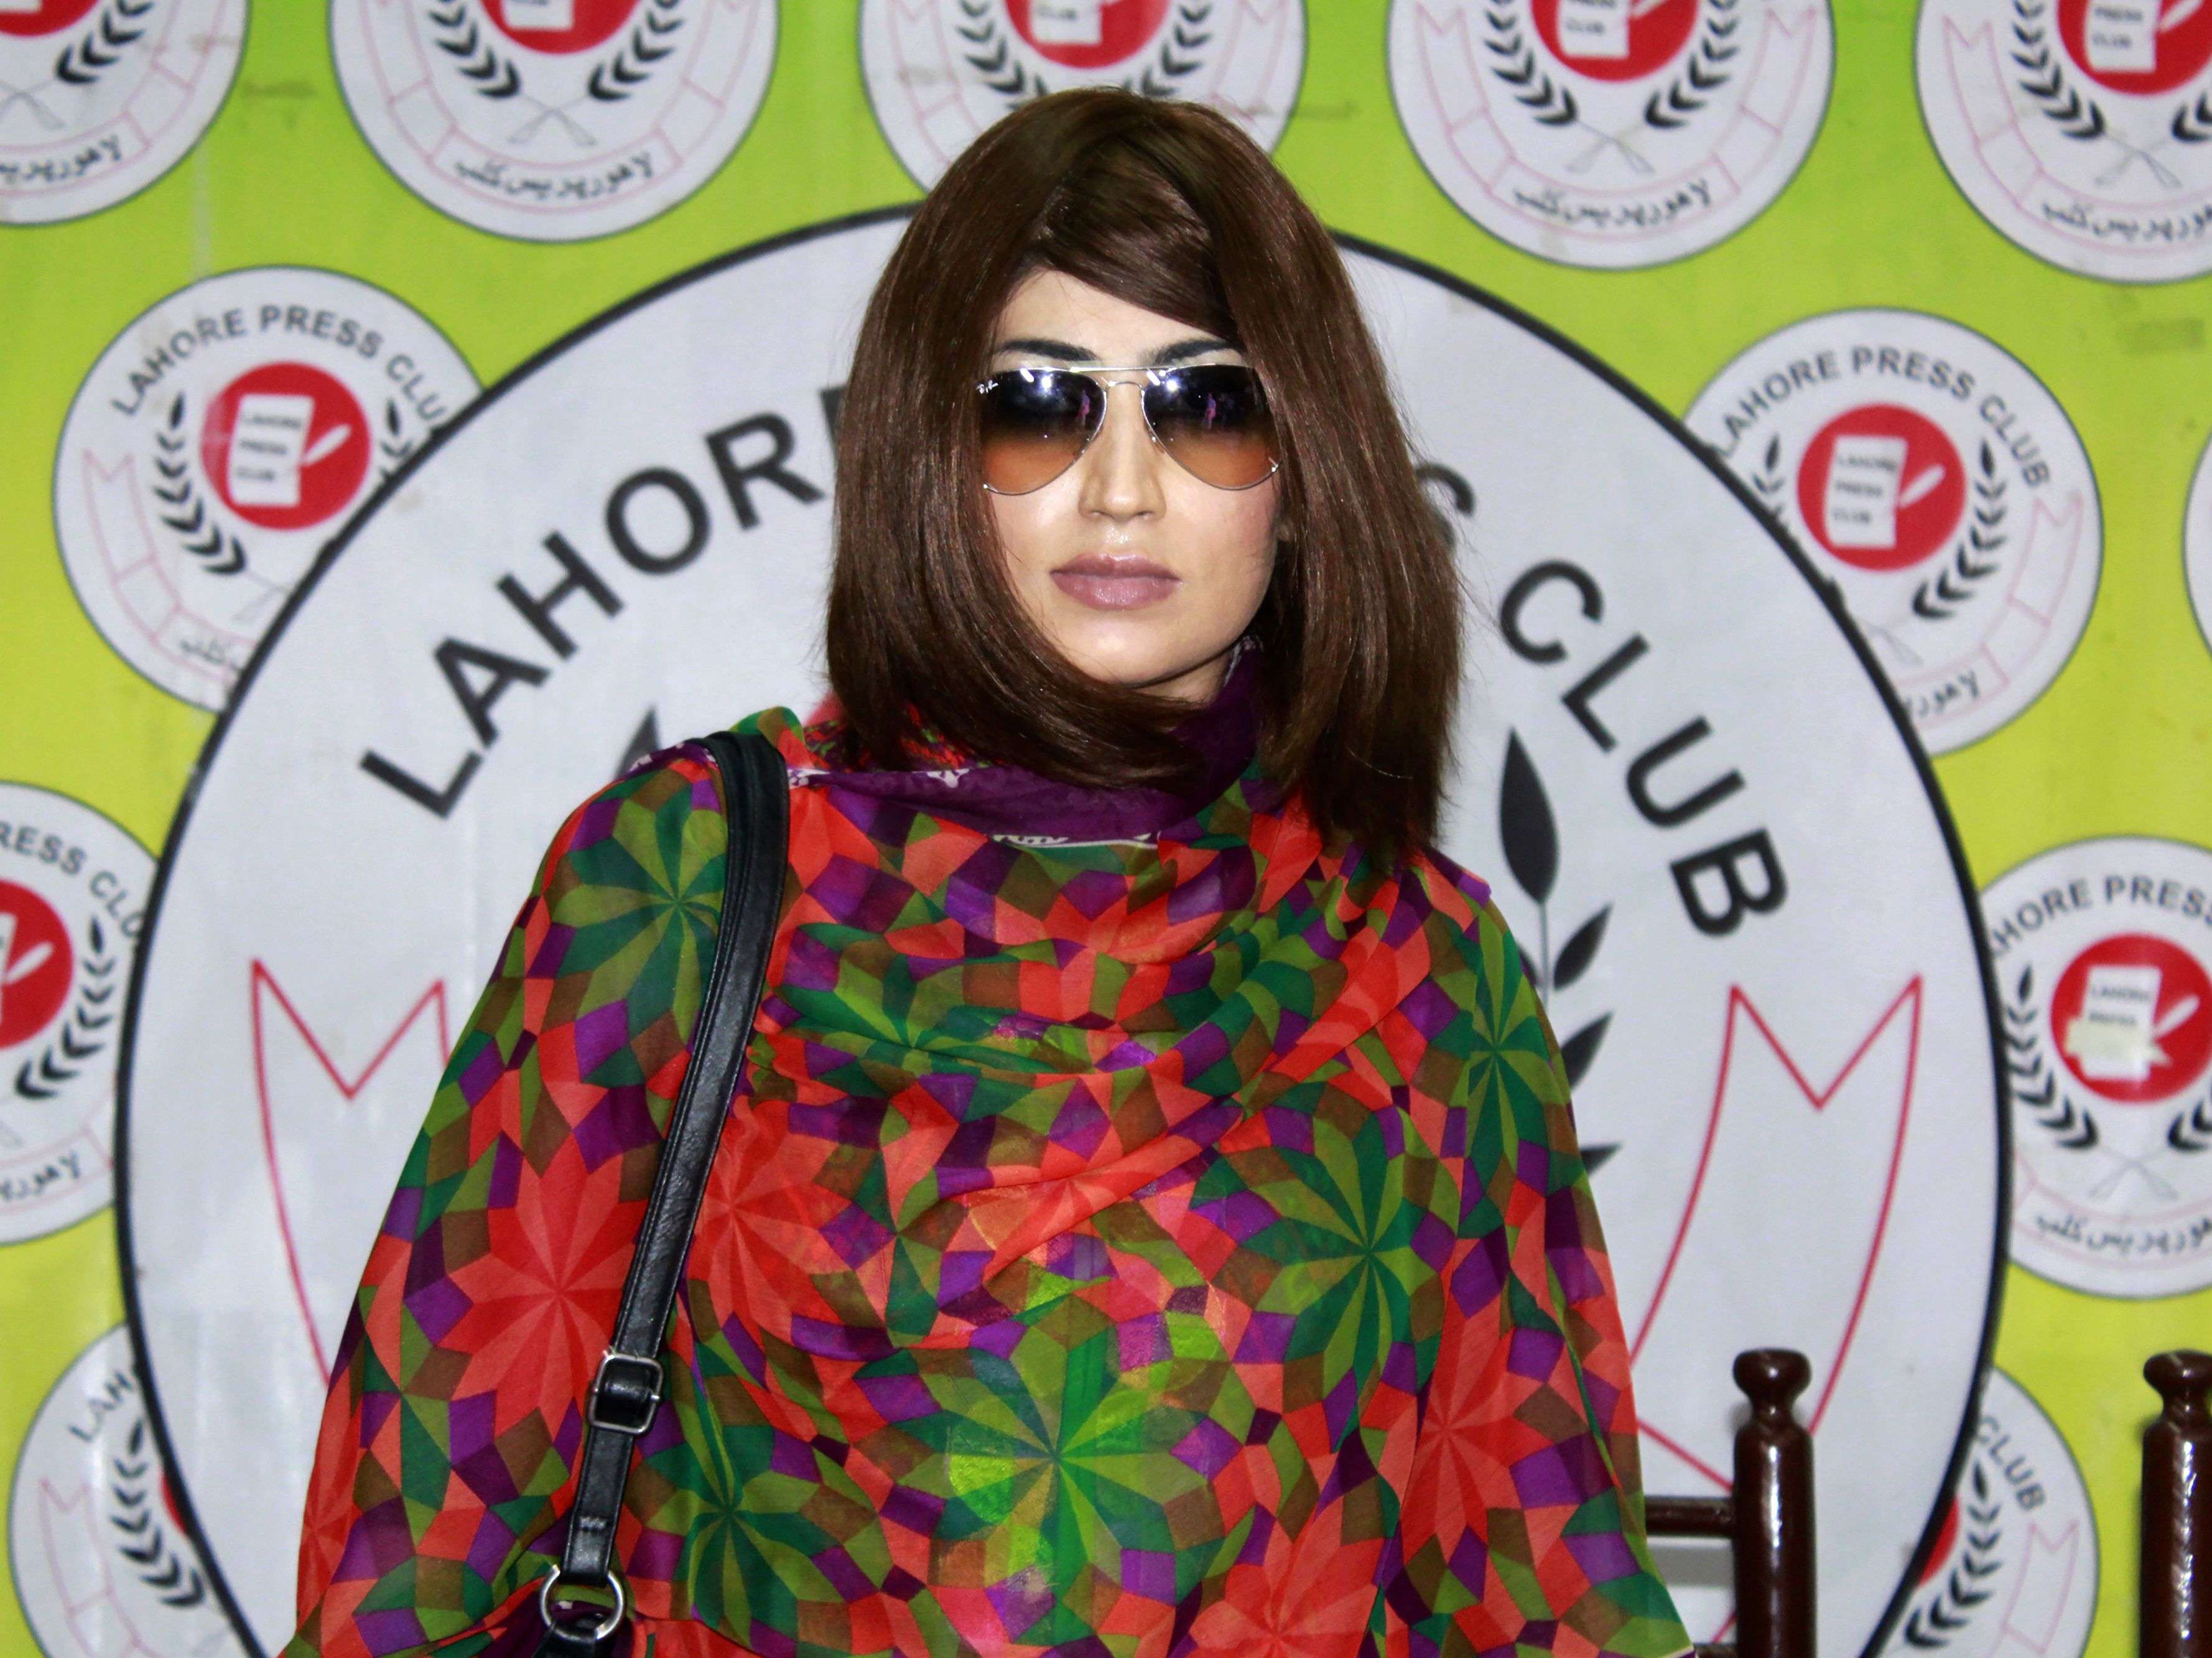 In this photograph taken on June 28, 2016, Pakistani social media celebrity, Qandeel Baloch arrives for a press conference in Lahore. A Pakistani social media celebrity whose online antics polarised the deeply conservative Muslim country has been murdered by her brother in a suspected honour killing, officials said on July 16, prompting a wave of shock and revulsion. Qandeel Baloch, held up by many of the country's youth for her willingness to break social taboos but condemned and reviled by traditional elements, was strangled near the city of Multan, police said. / AFP PHOTO / STR